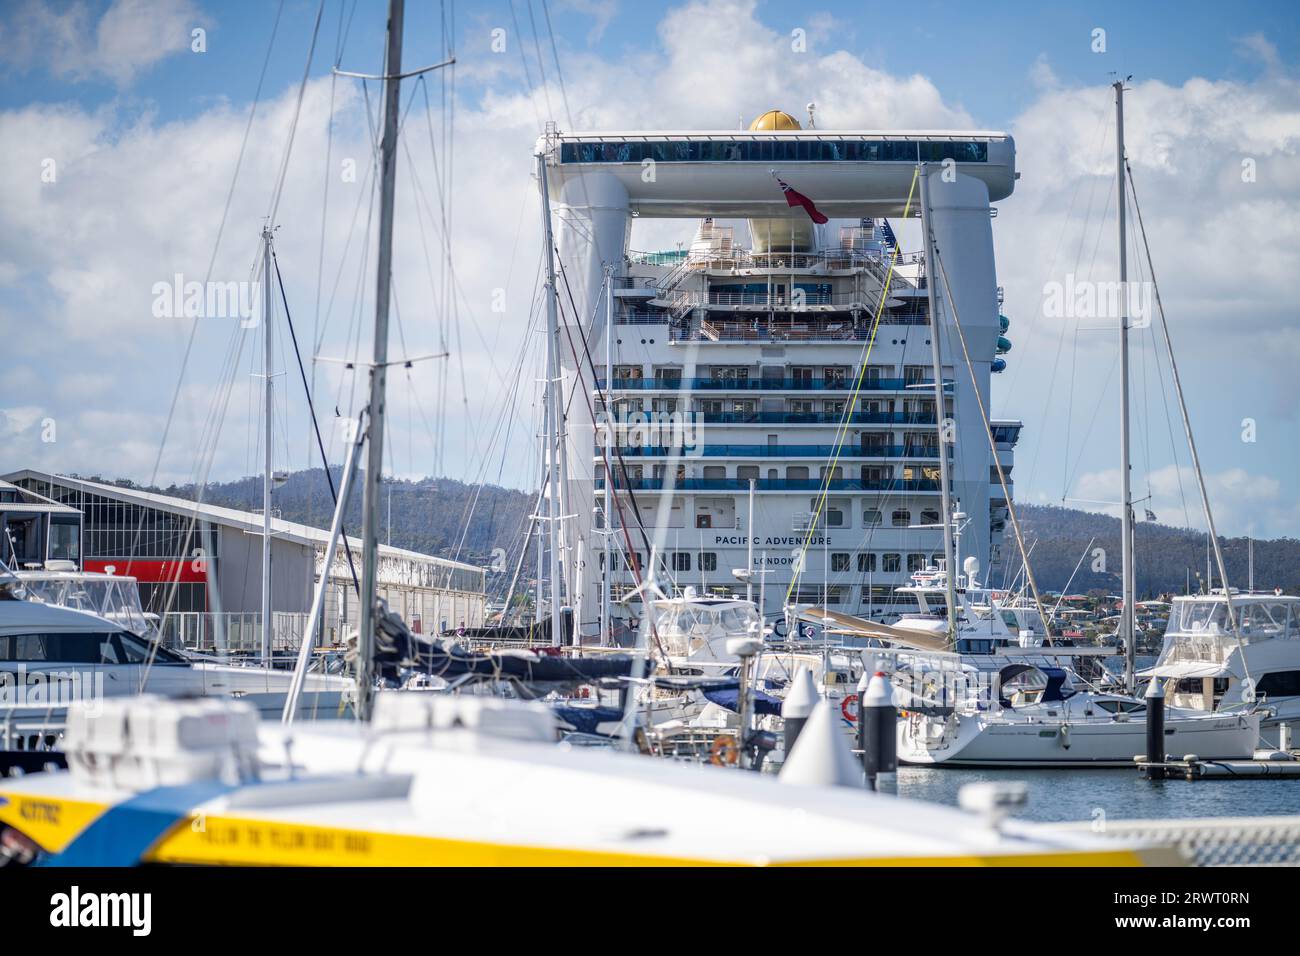 p&o cruise boat in the wharf at hobart in spring Stock Photo